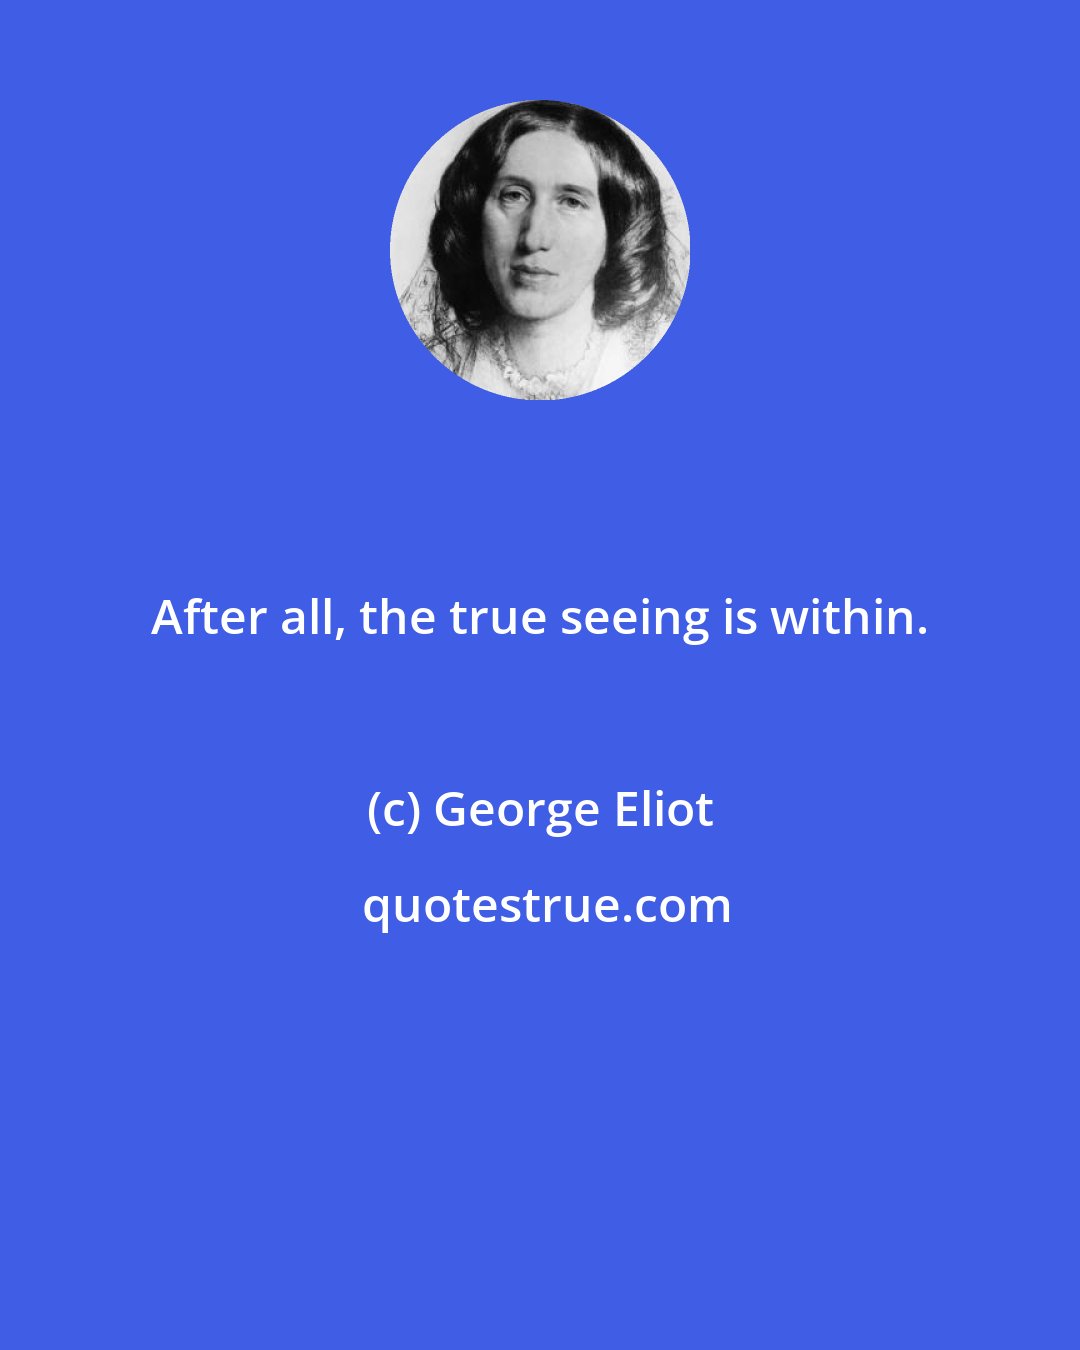 George Eliot: After all, the true seeing is within.